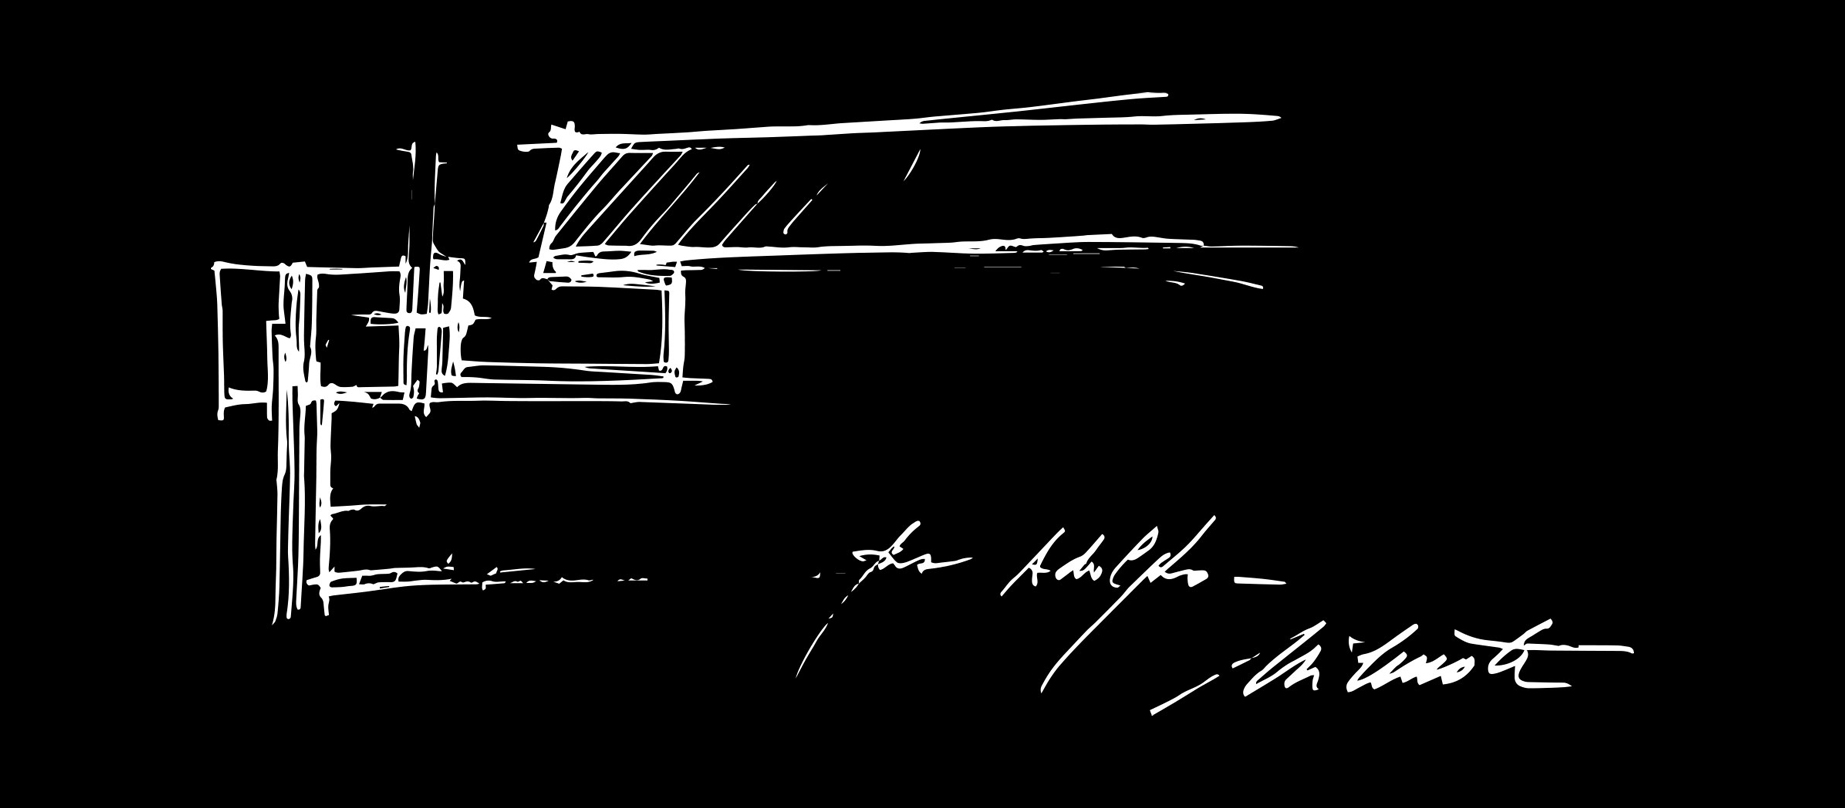 iWay drawing by J. M. Wilmotte for iGuzzini